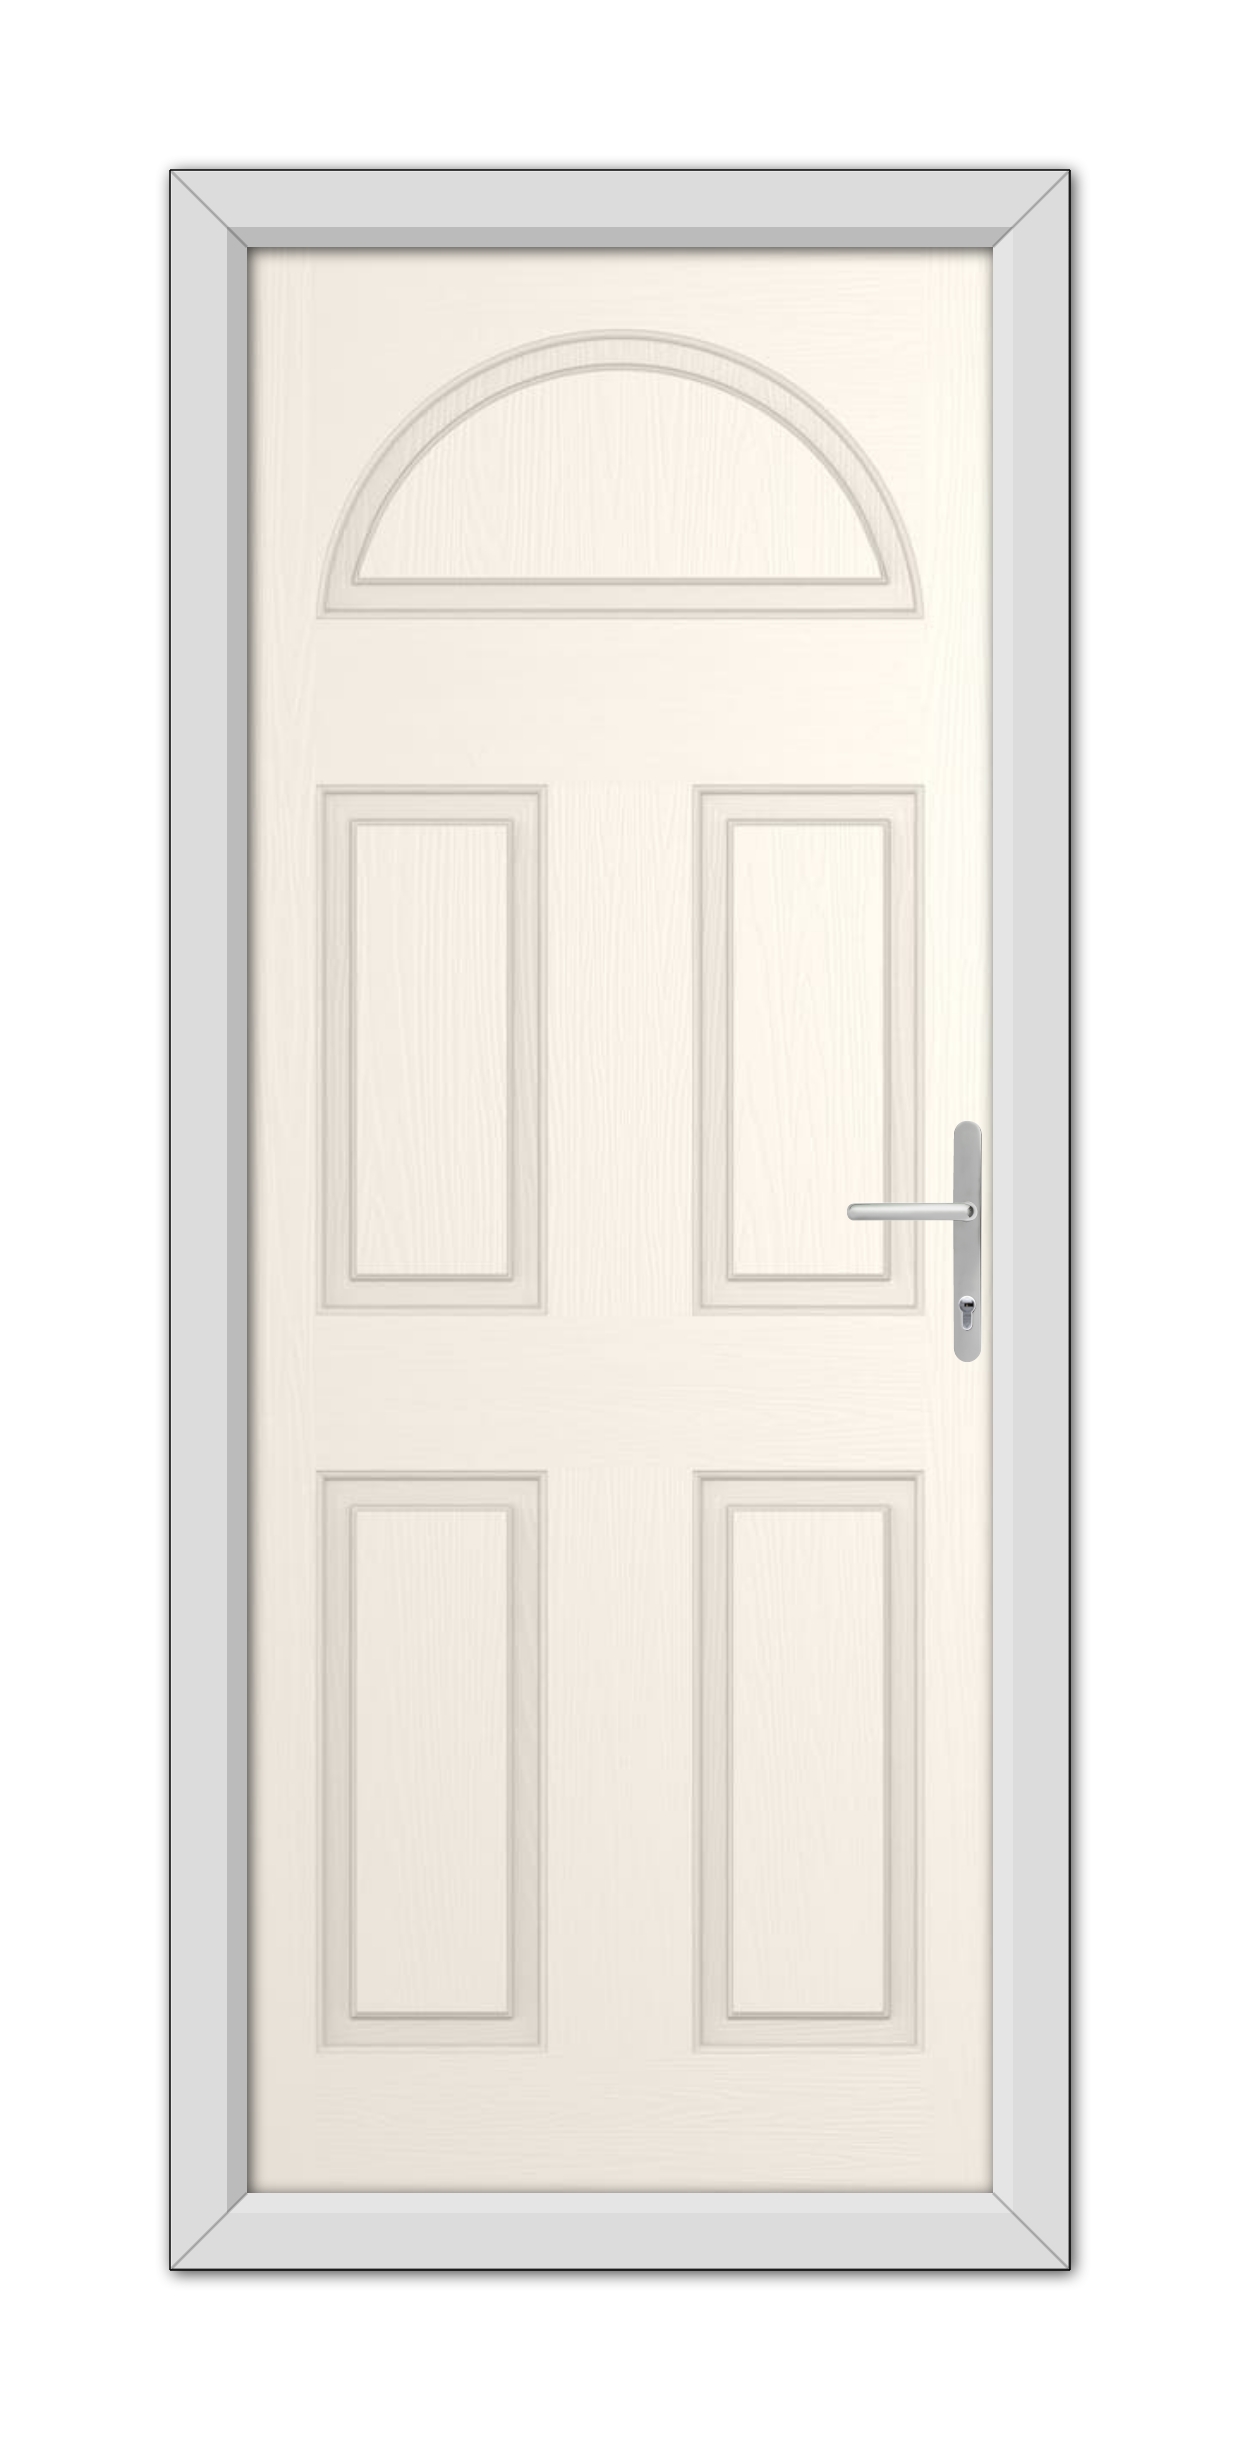 A White Foil Winslow Solid Composite Door 48mm Timber Core with six panels and a silver handle, set in a gray door frame with an arched transom window.